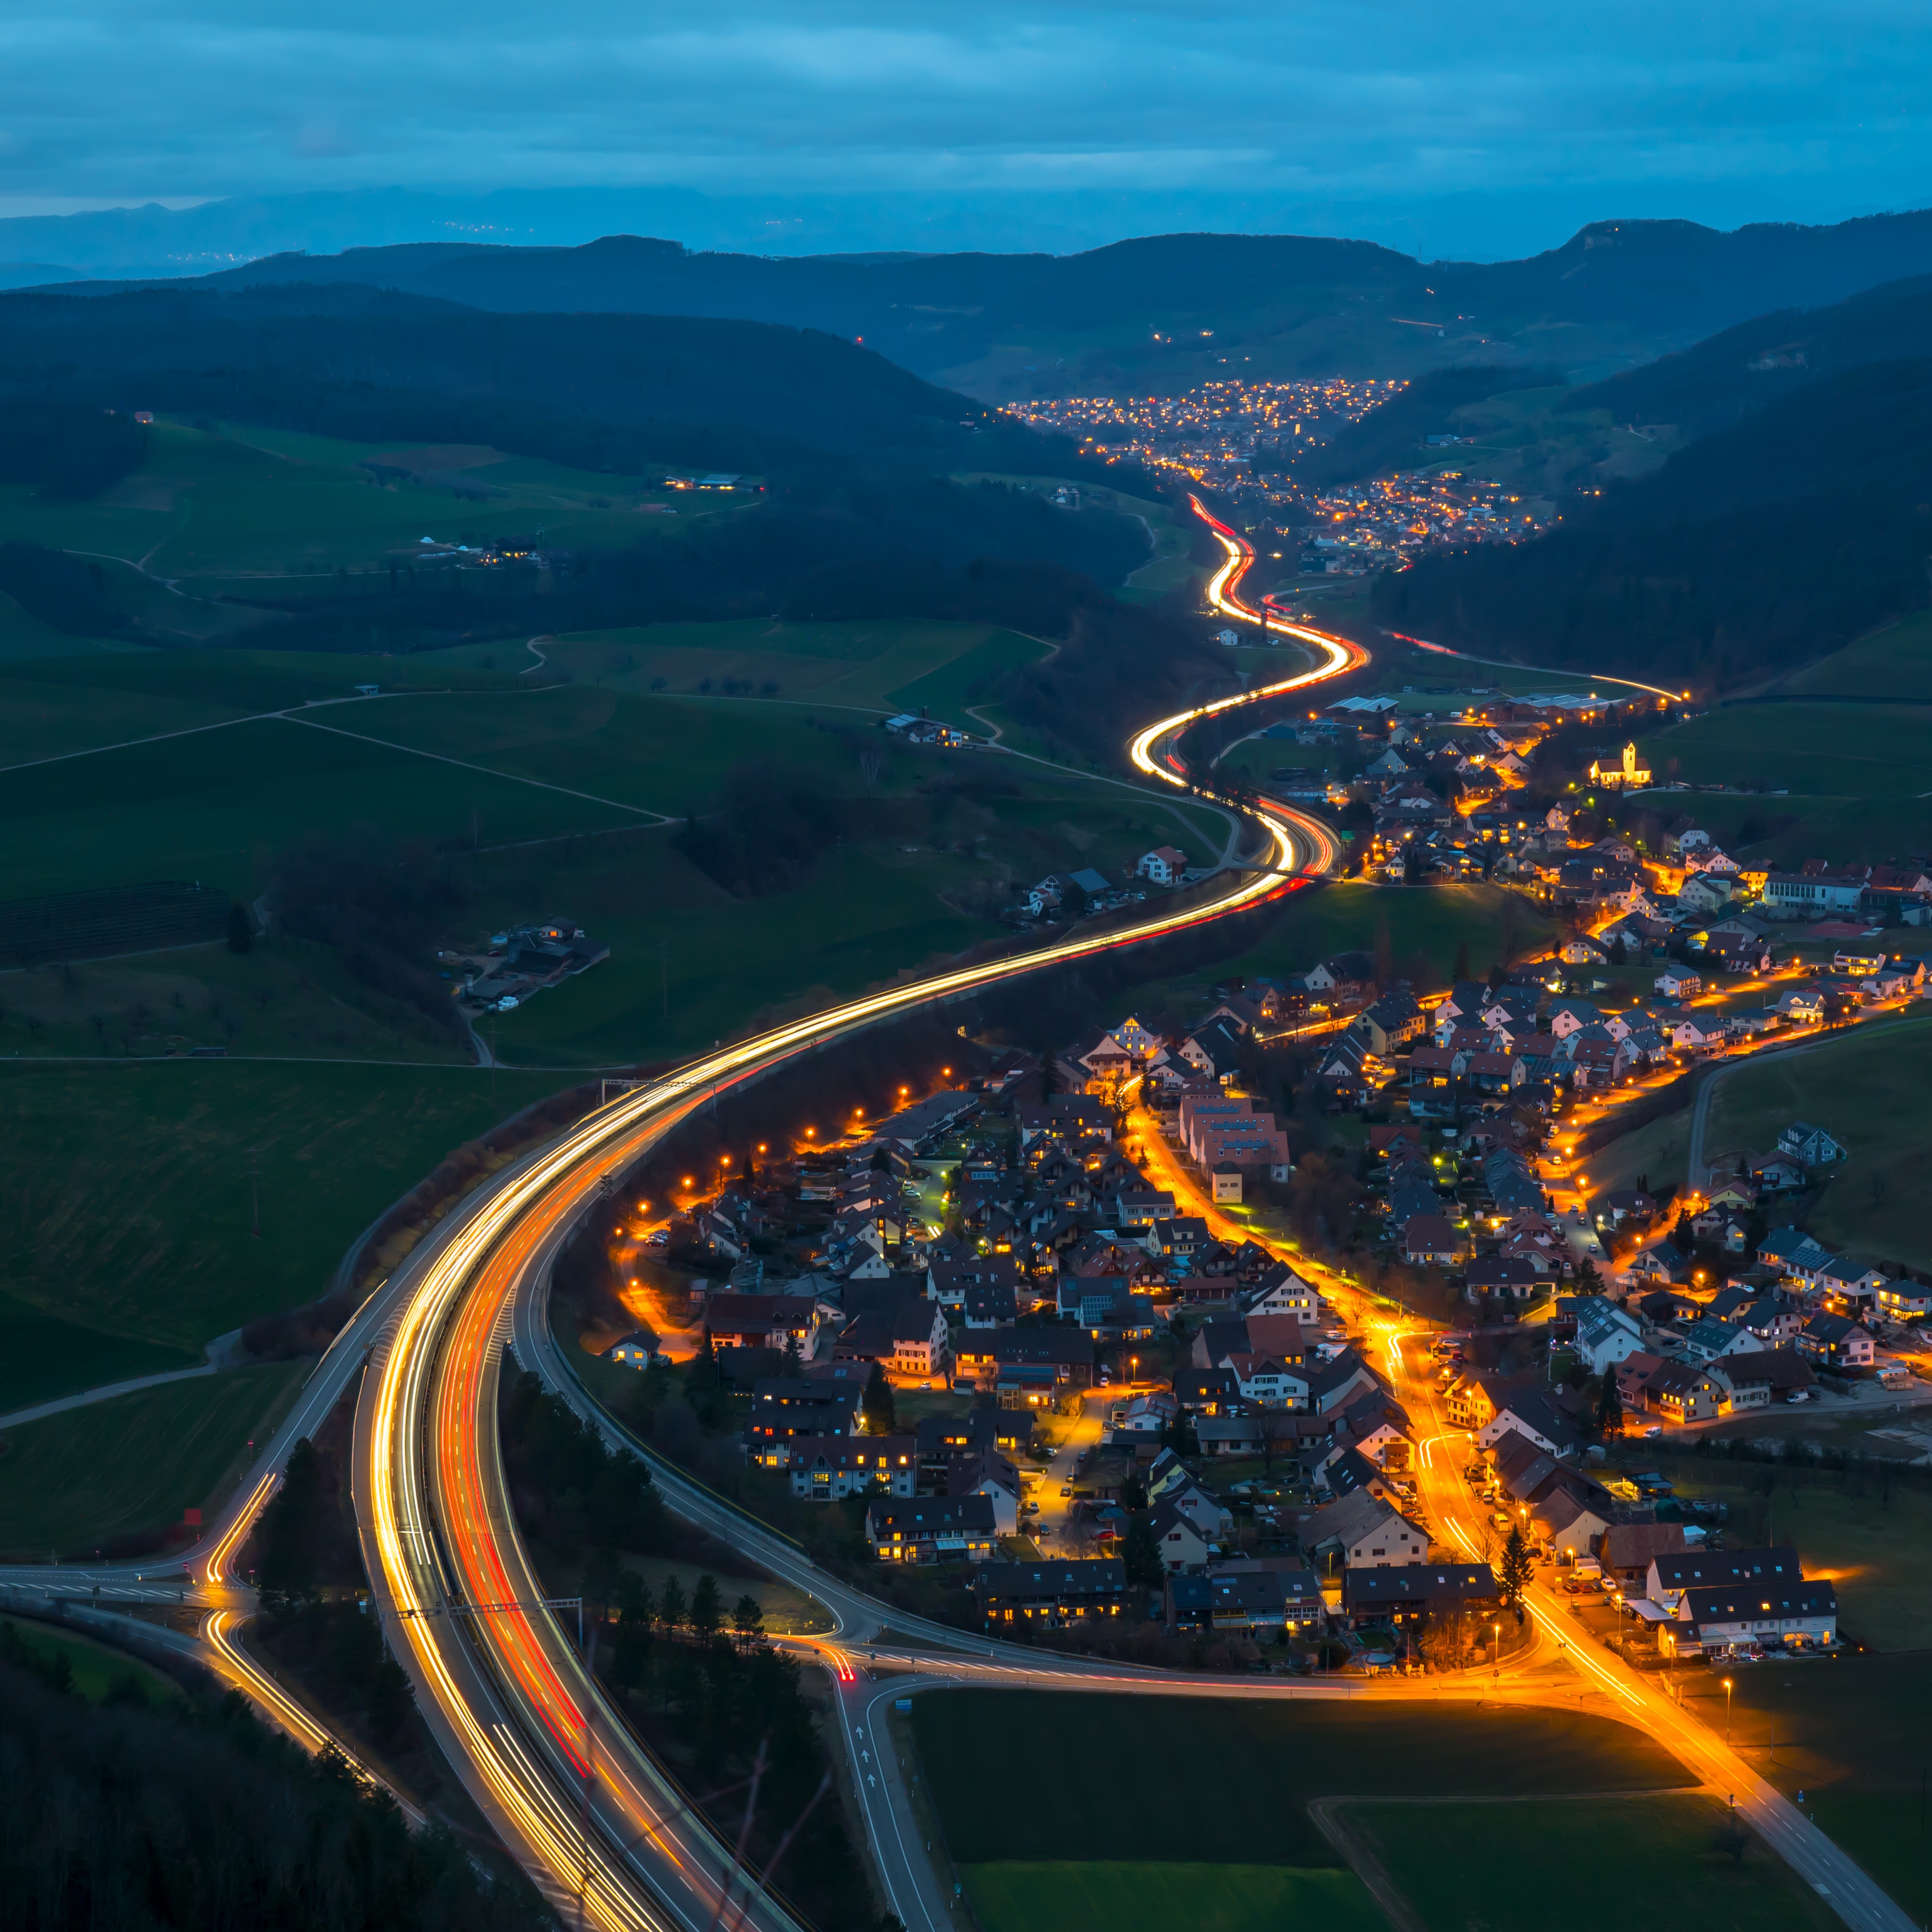 mountains, roads, switzerland, cities, night, view from above, village